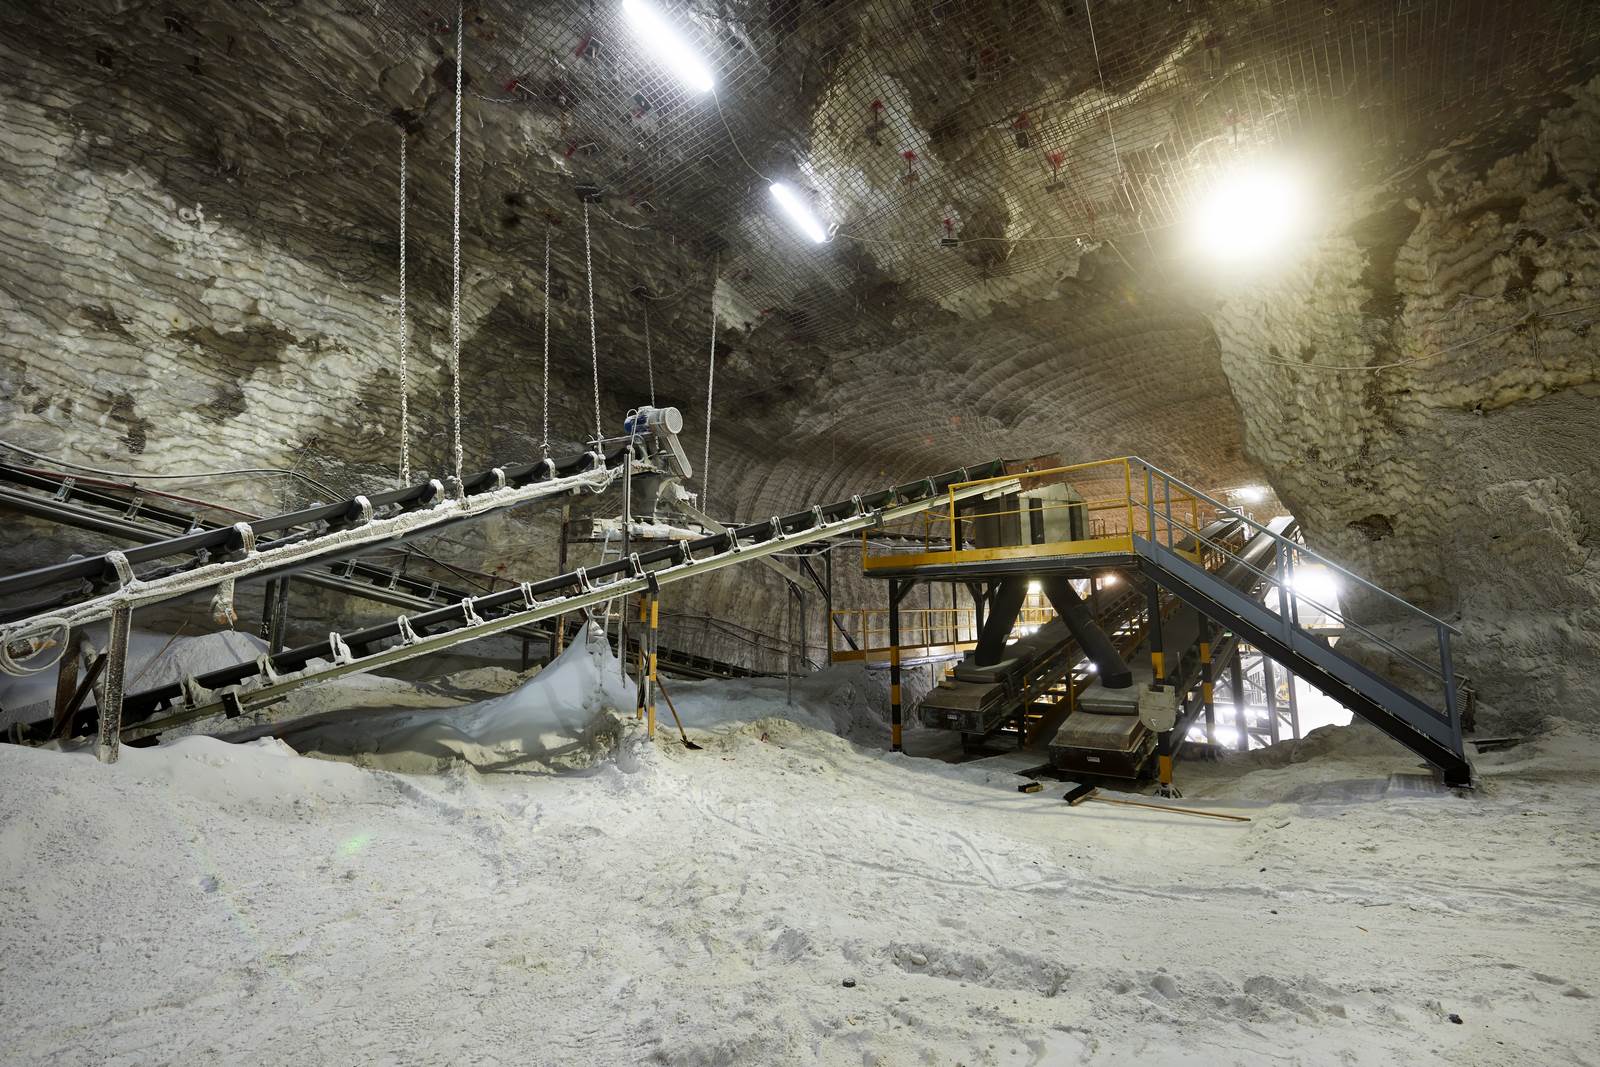 the whole production process takes place underground